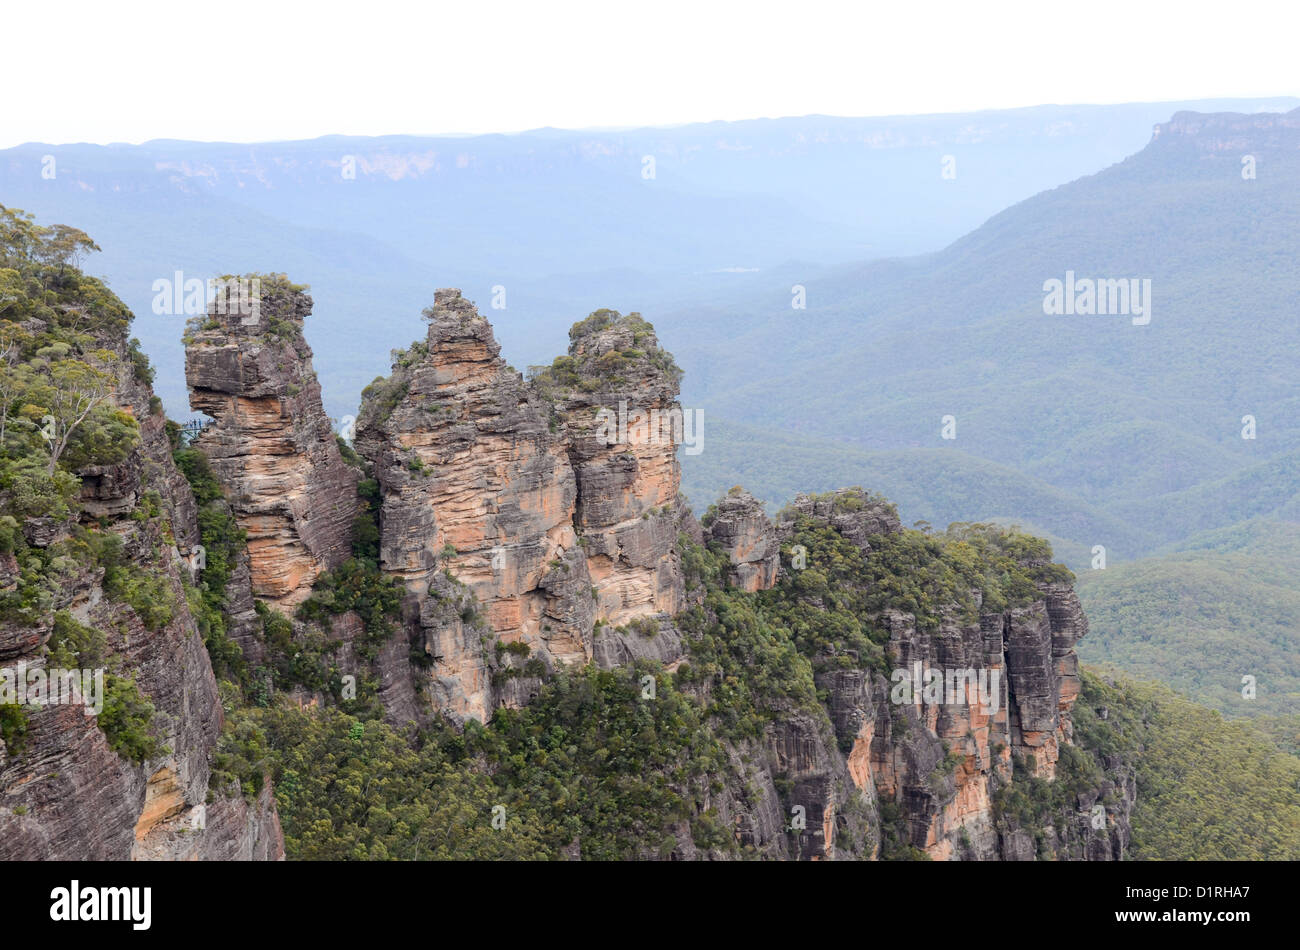 KATOOMBA, Australia - The rock formation known as the Three Sisters in the Blue Mountains as seen from Echo Point in Katoomba, New South Wales, Australia. Stock Photo